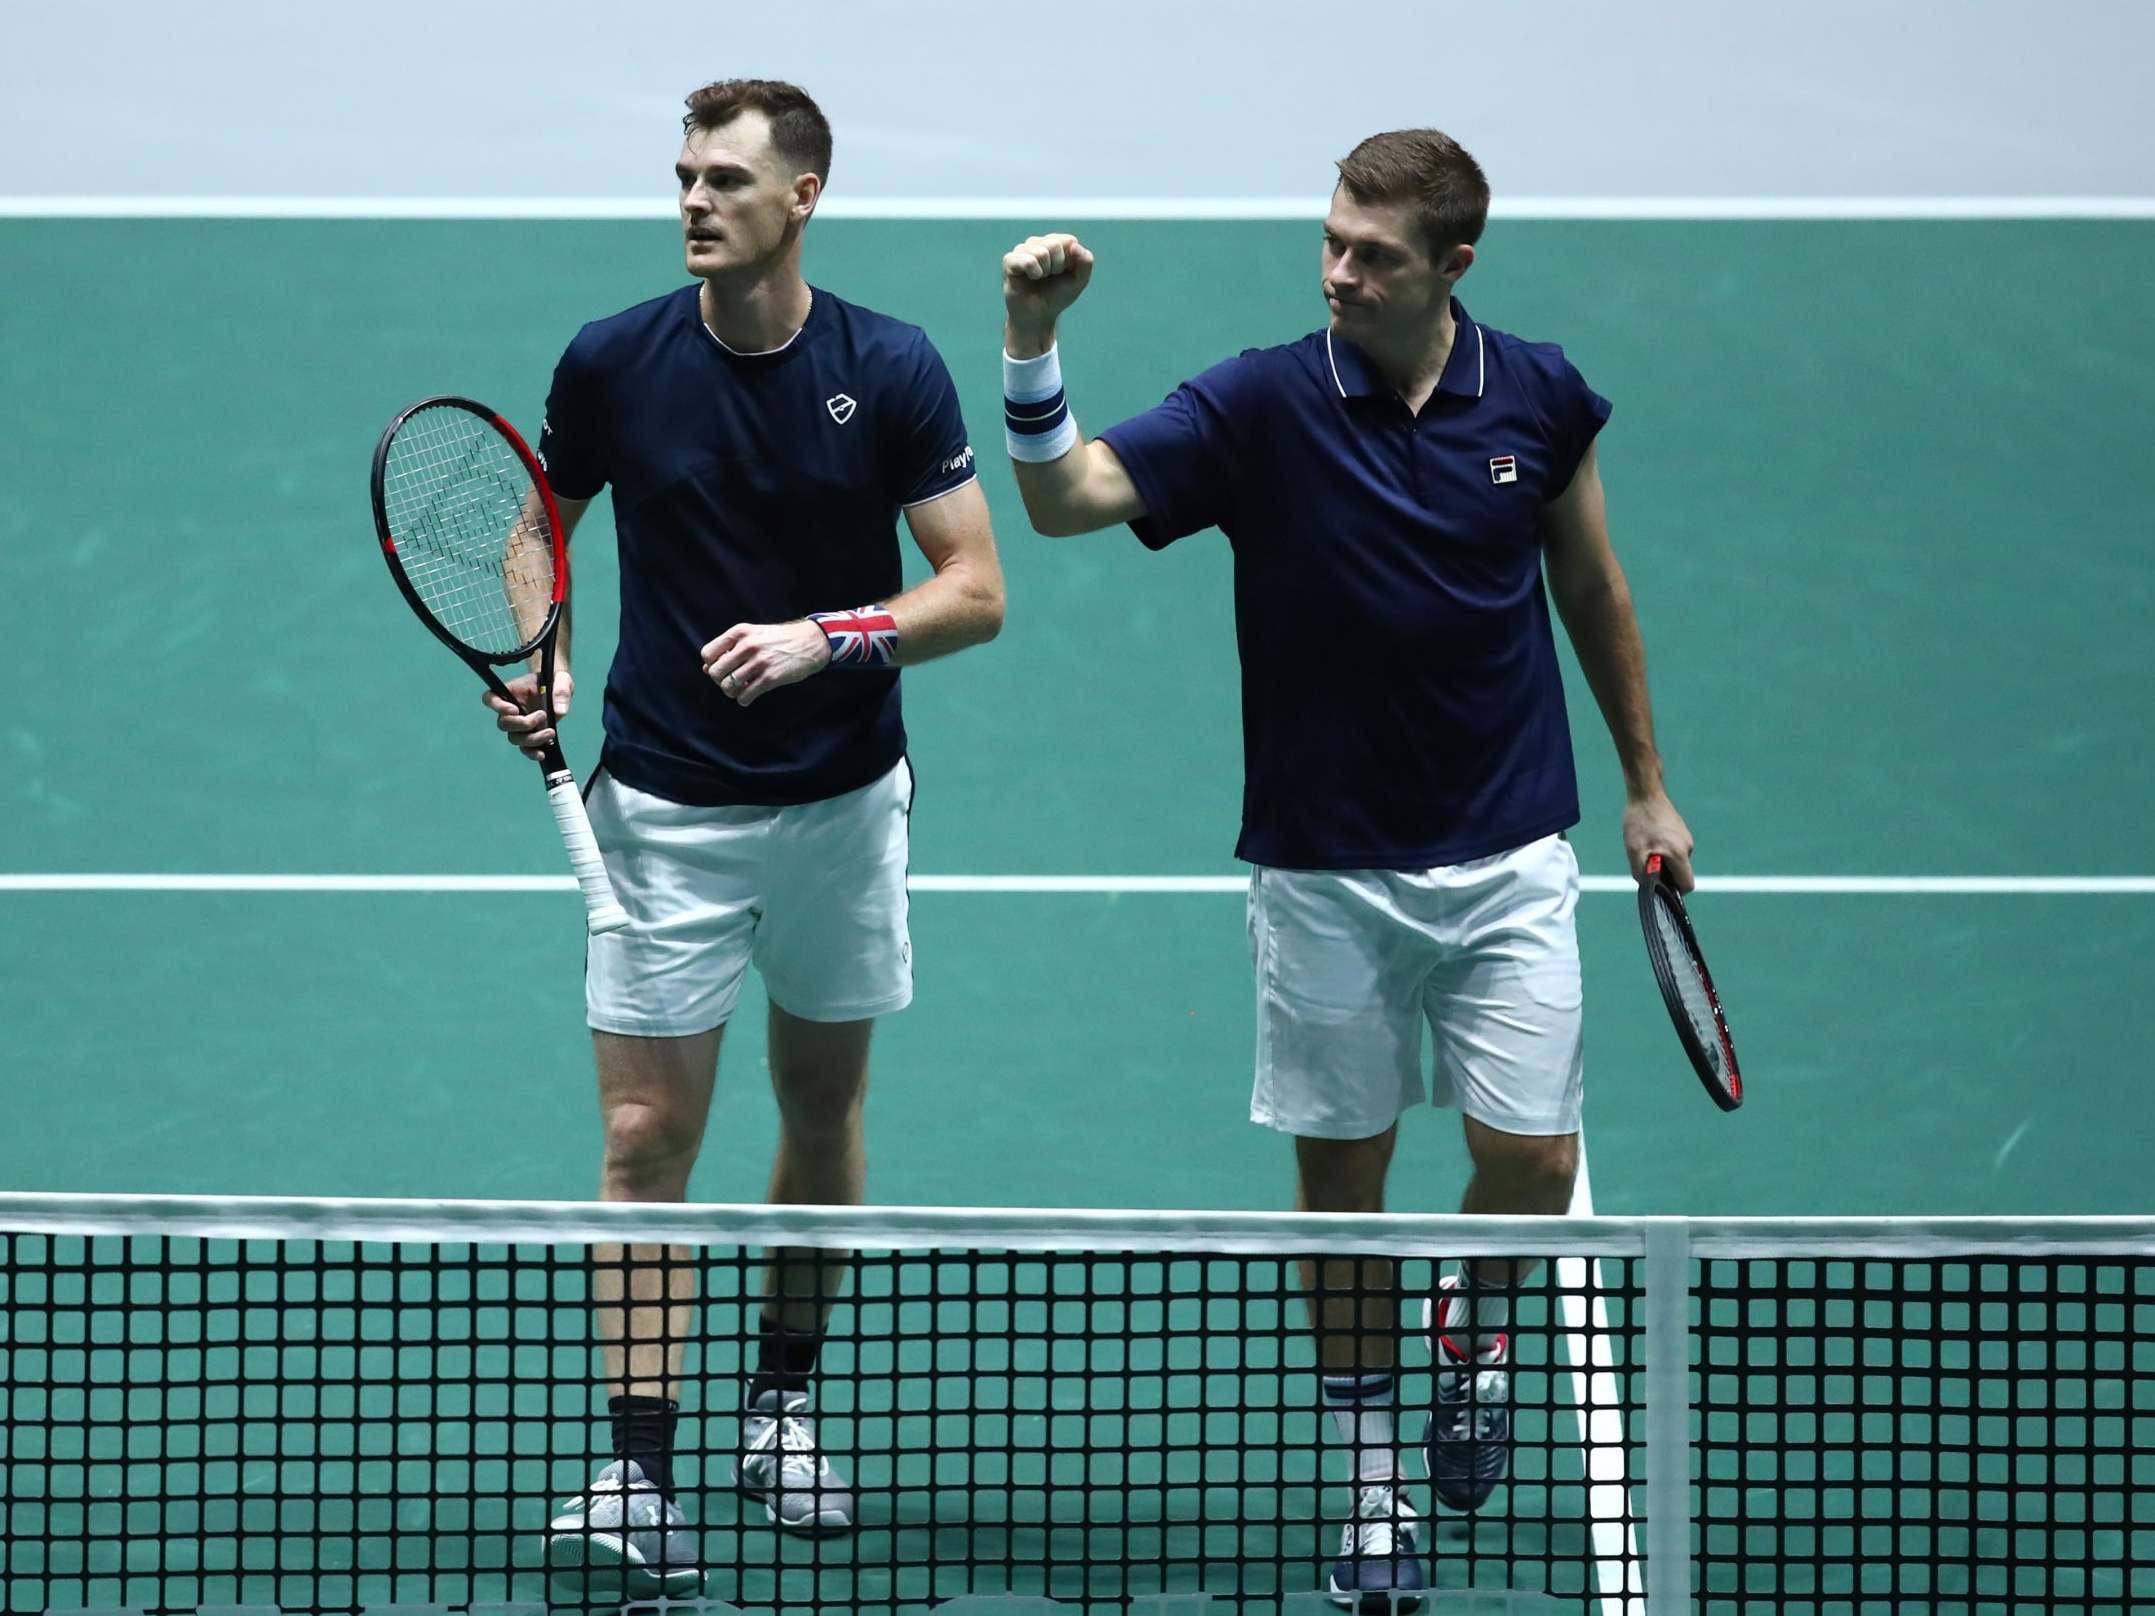 Davis Cup: Great Britain sail into quarter-finals despite Andy Murray's absence